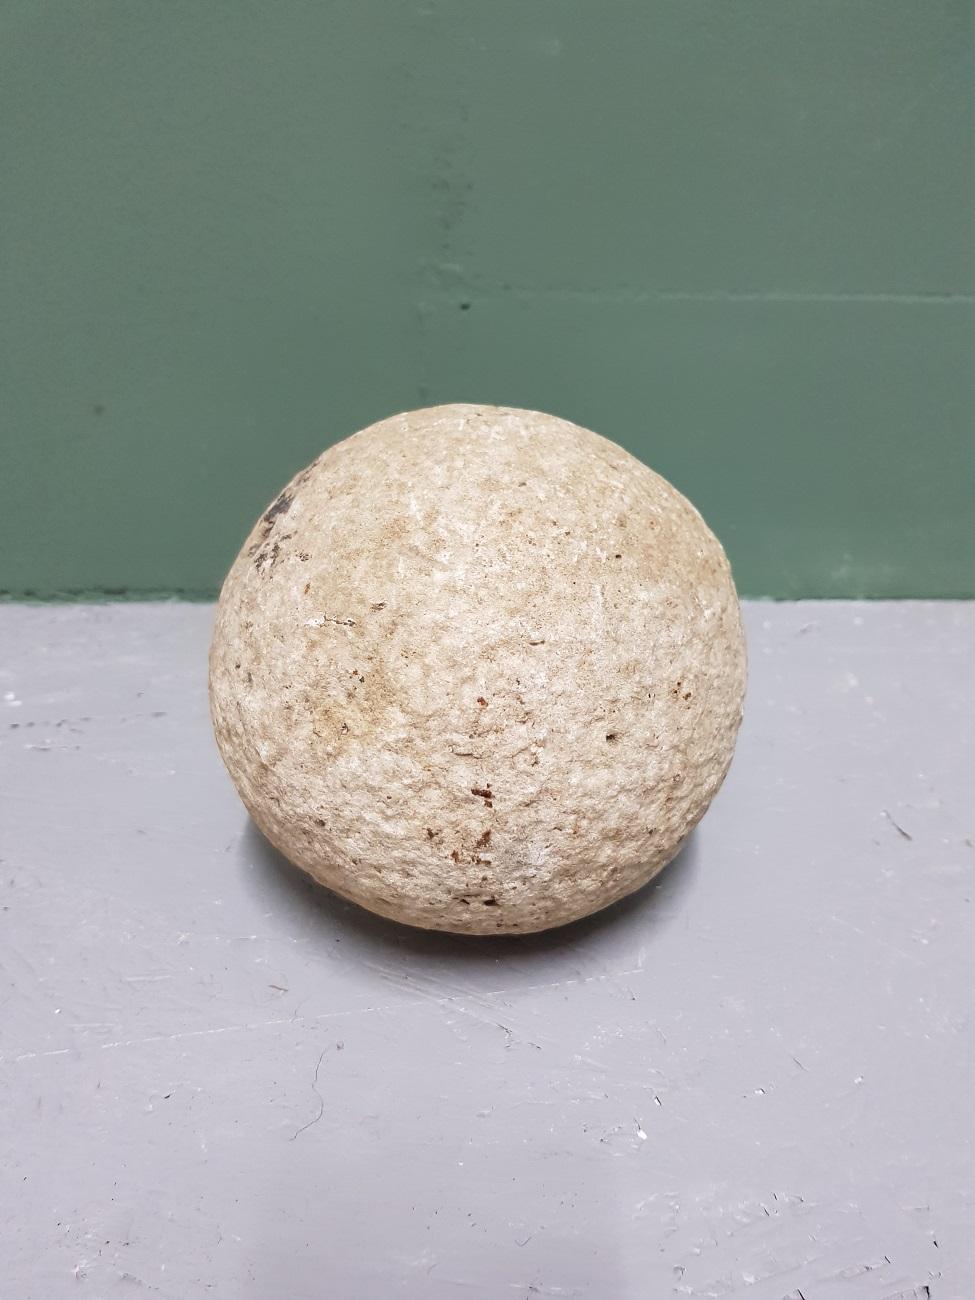 Almost perfectly round stone cannon ball from the Middle Ages circa 16th-17th century, and weighs around 3.5 kilogram.

The measurements are,
Depth 15 cm/ 5.9 inch.
Width 15 cm/ 5.9 inch.
Height 15 cm/ 5.9 inch.

€65,-. No.4144.